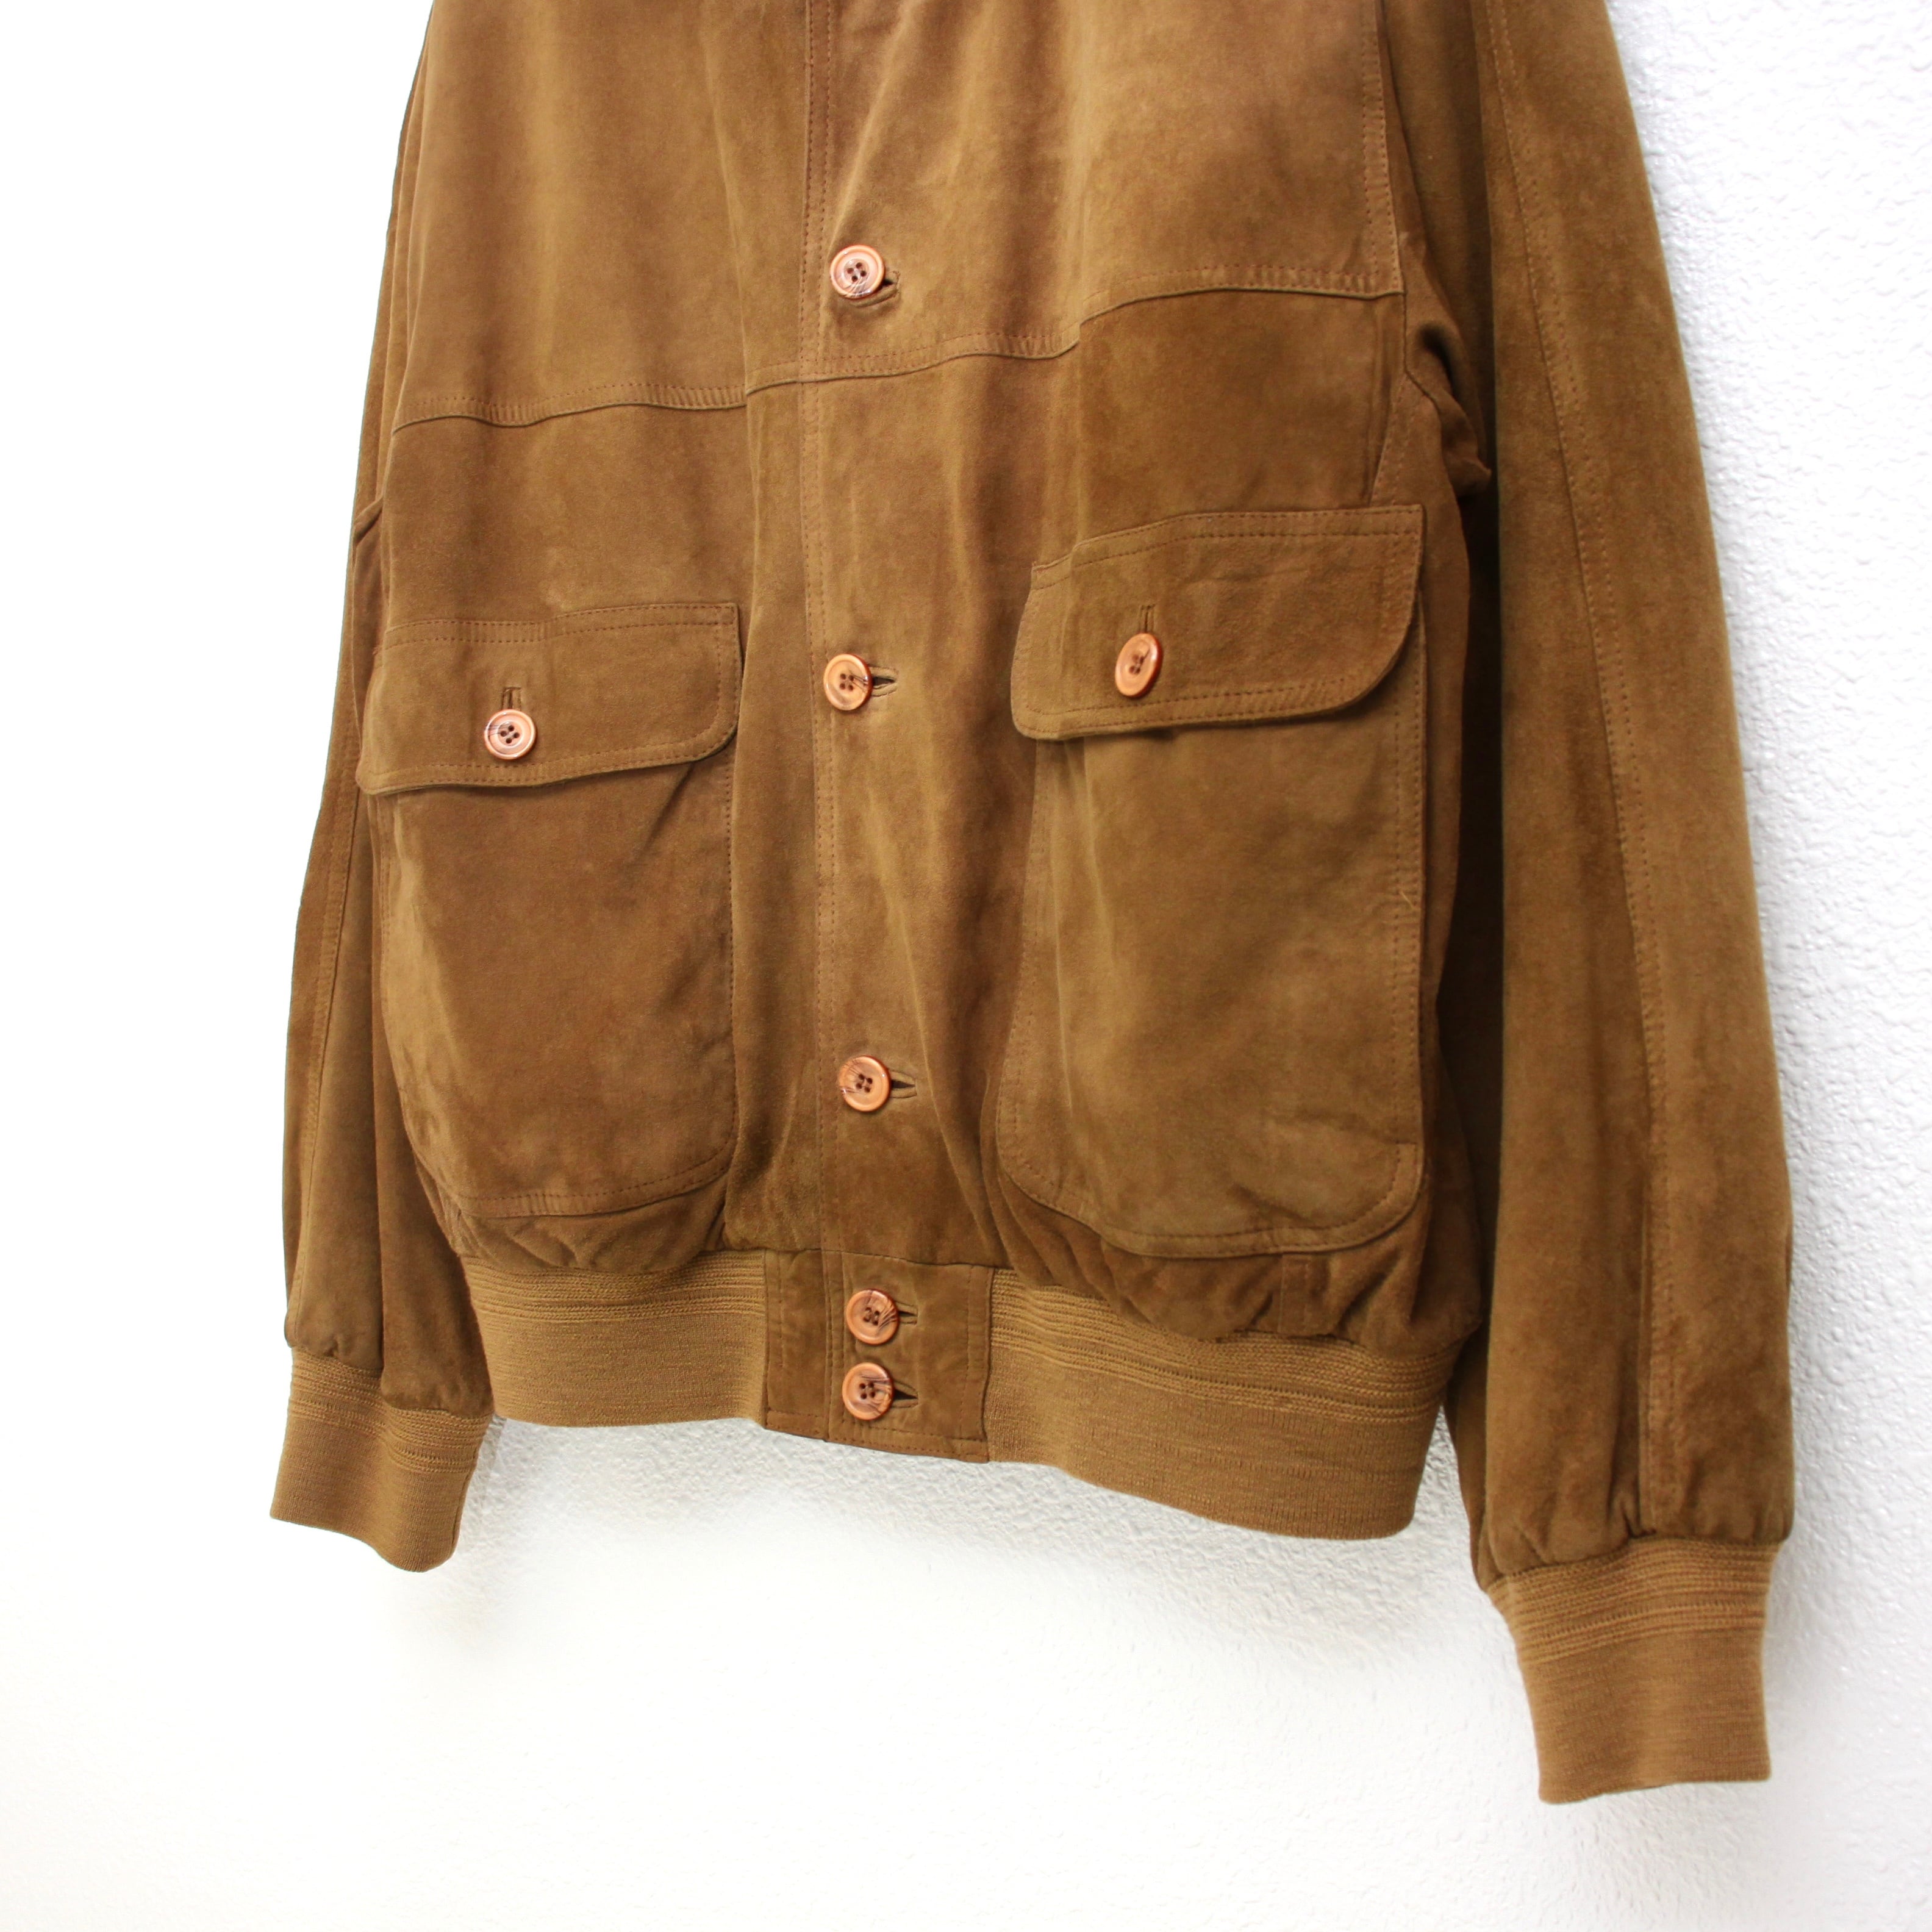 0128 / 1990's suede leather valstar type ブラウン スエードレザー